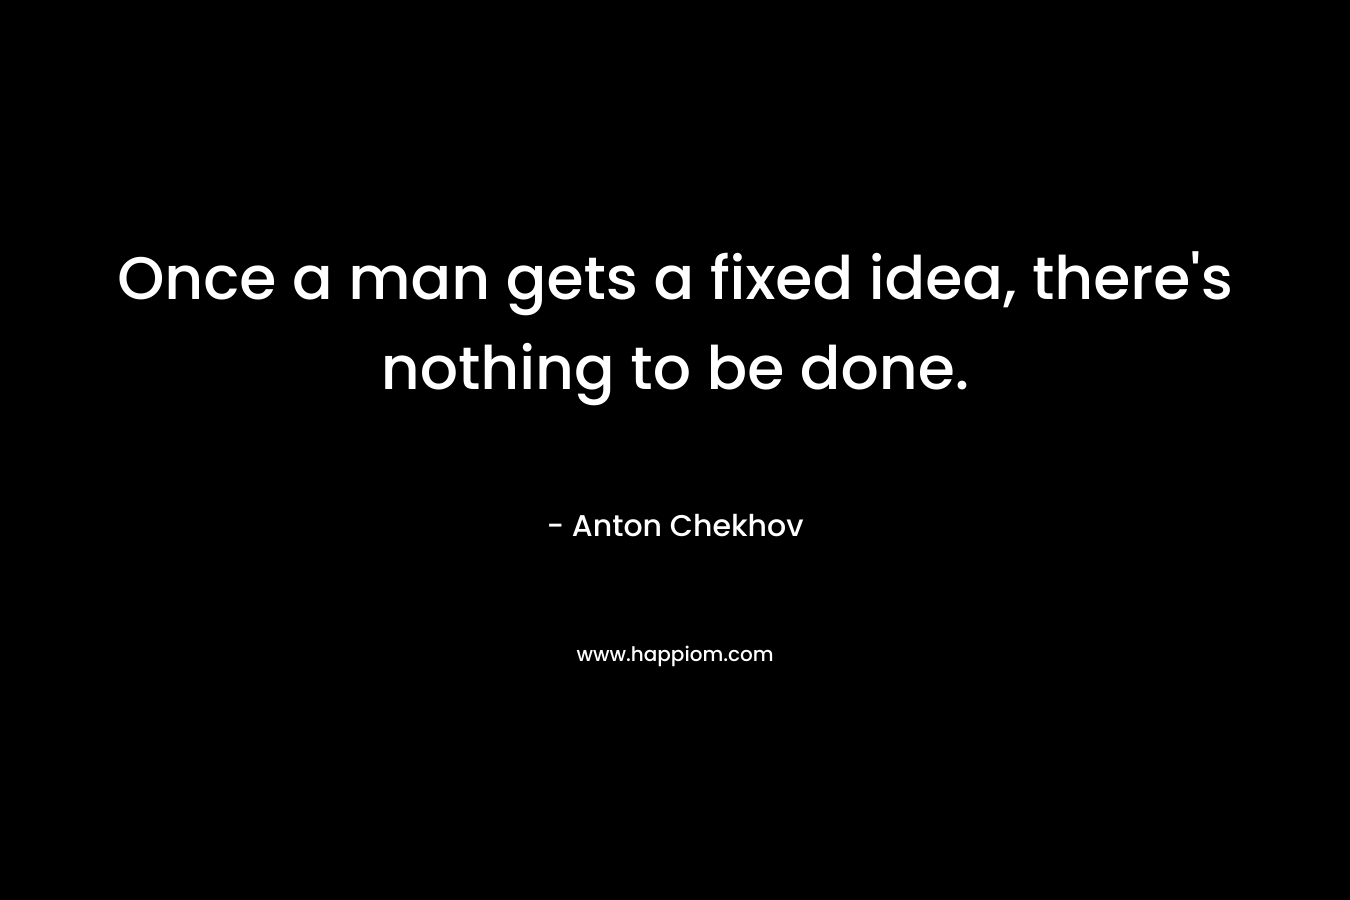 Once a man gets a fixed idea, there's nothing to be done.